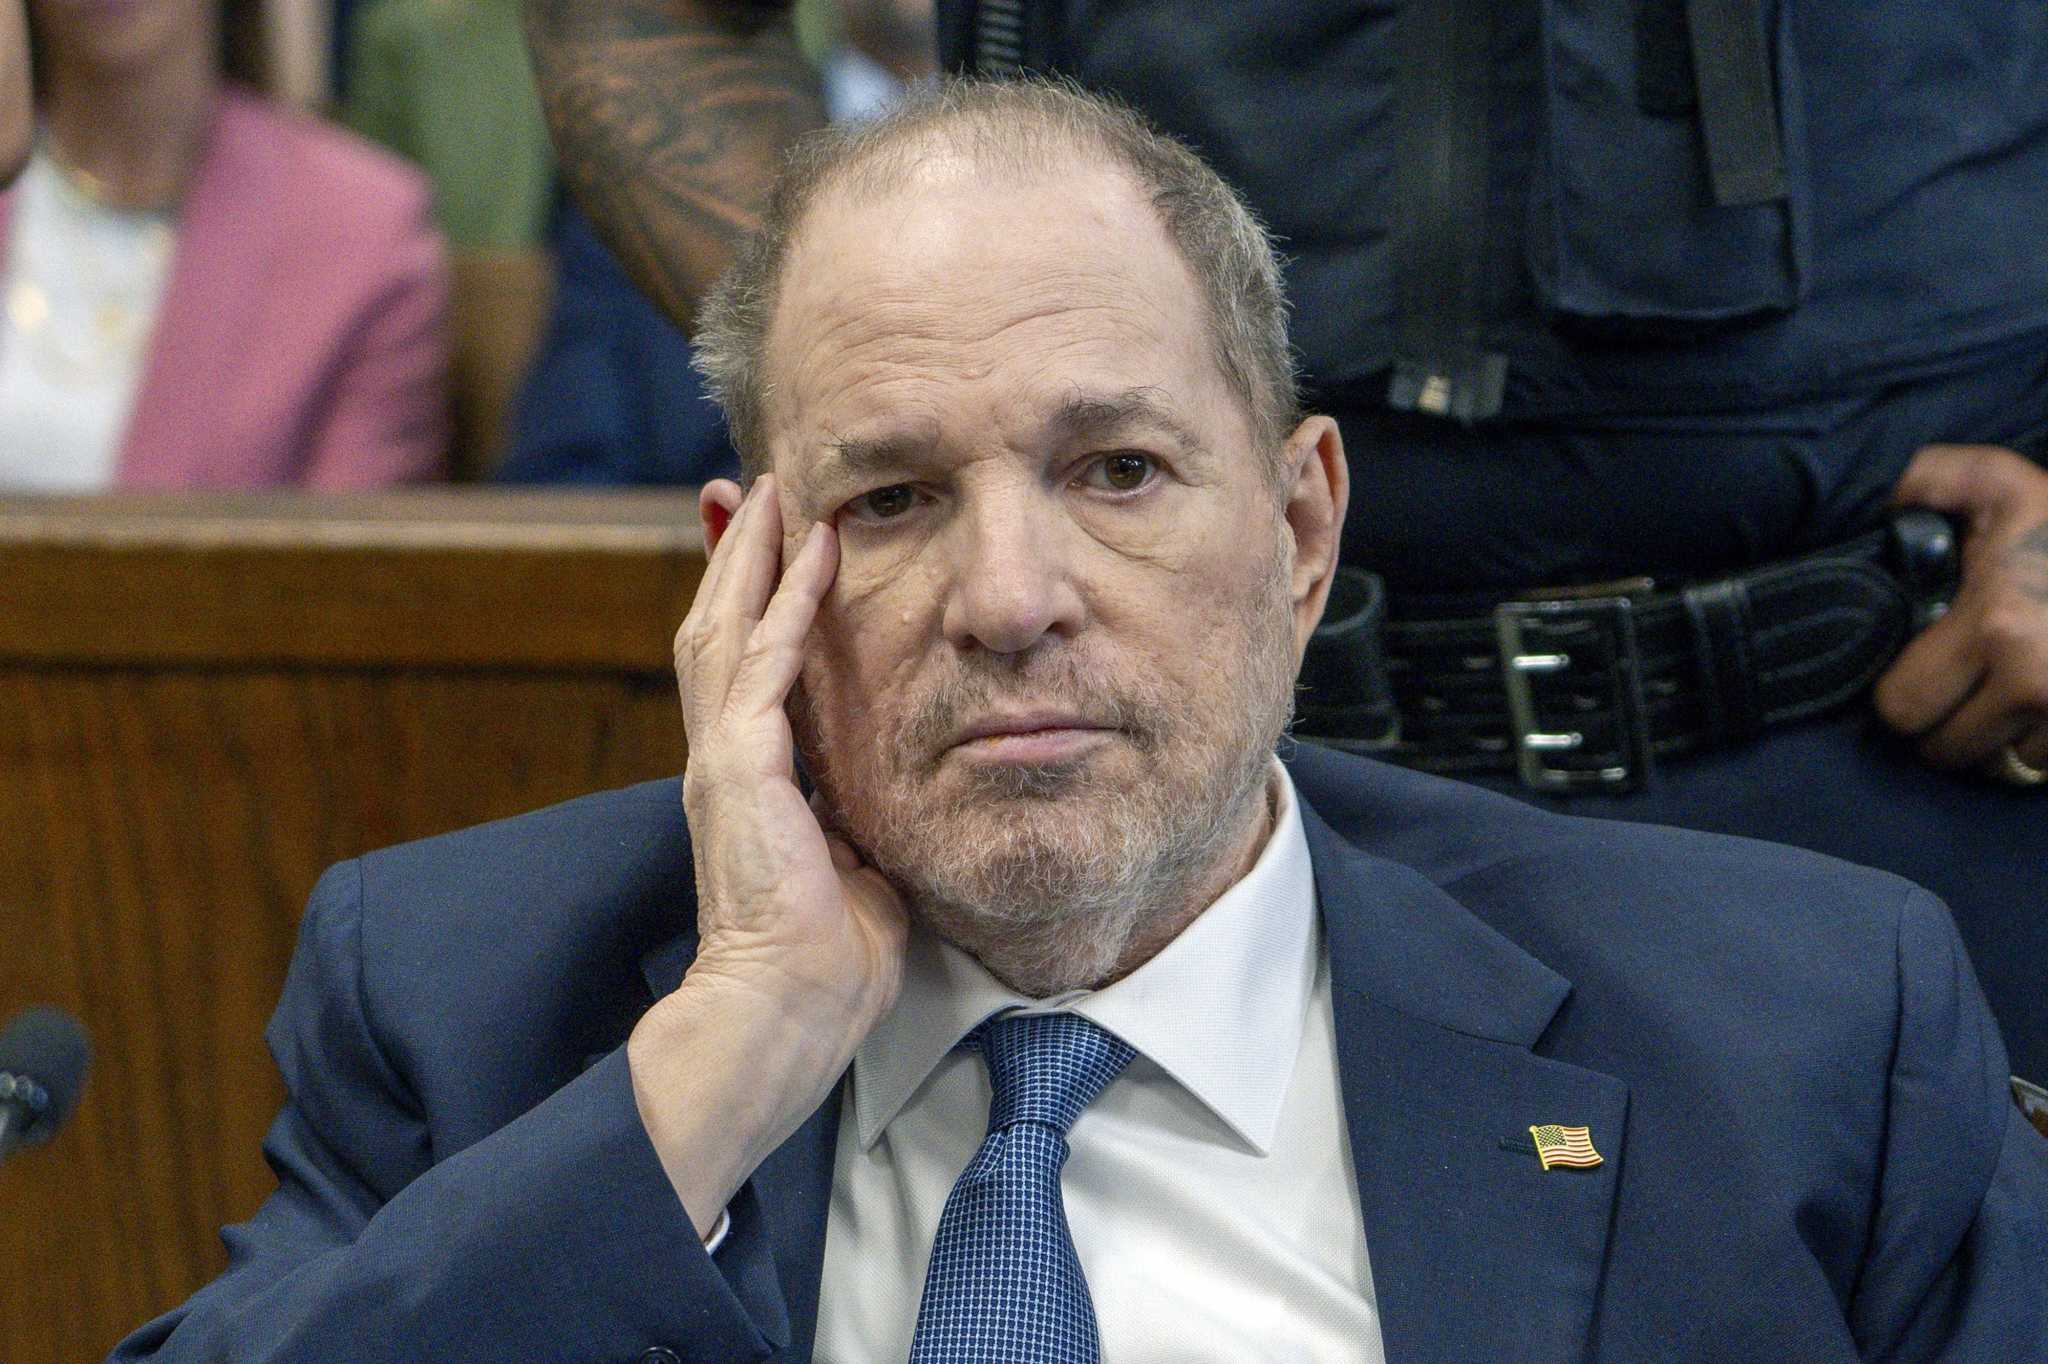 After Weinstein's case was overturned, New York considers strengthening sex crime prosecutions